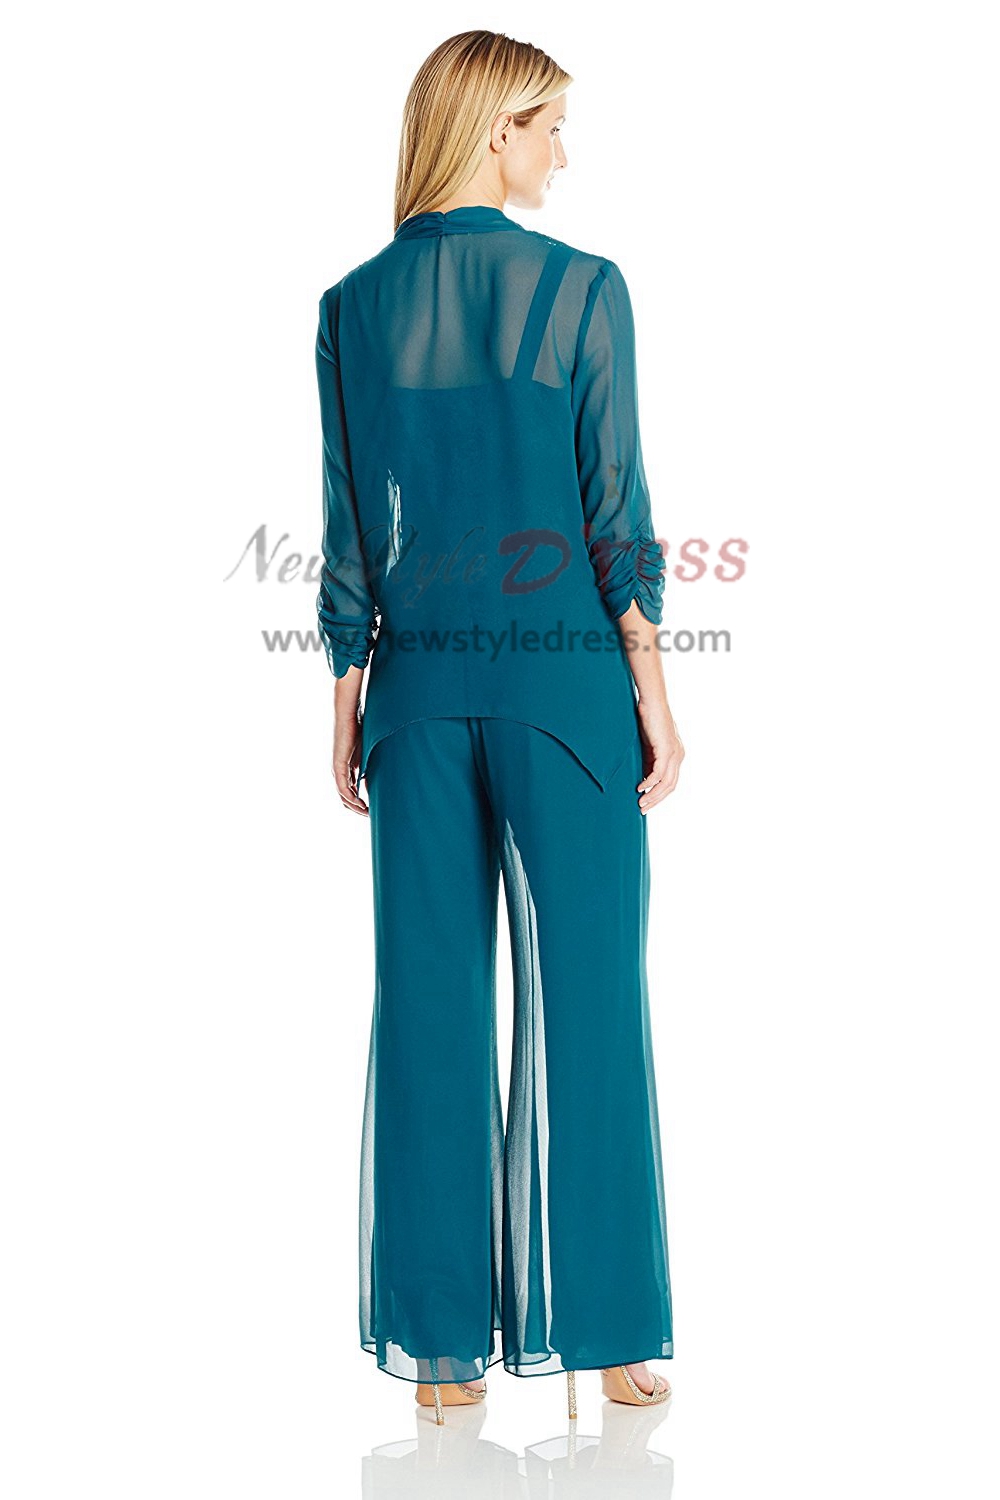 Greenblack Hunter Mother of the bride pant suits Chiffon Three piece ...